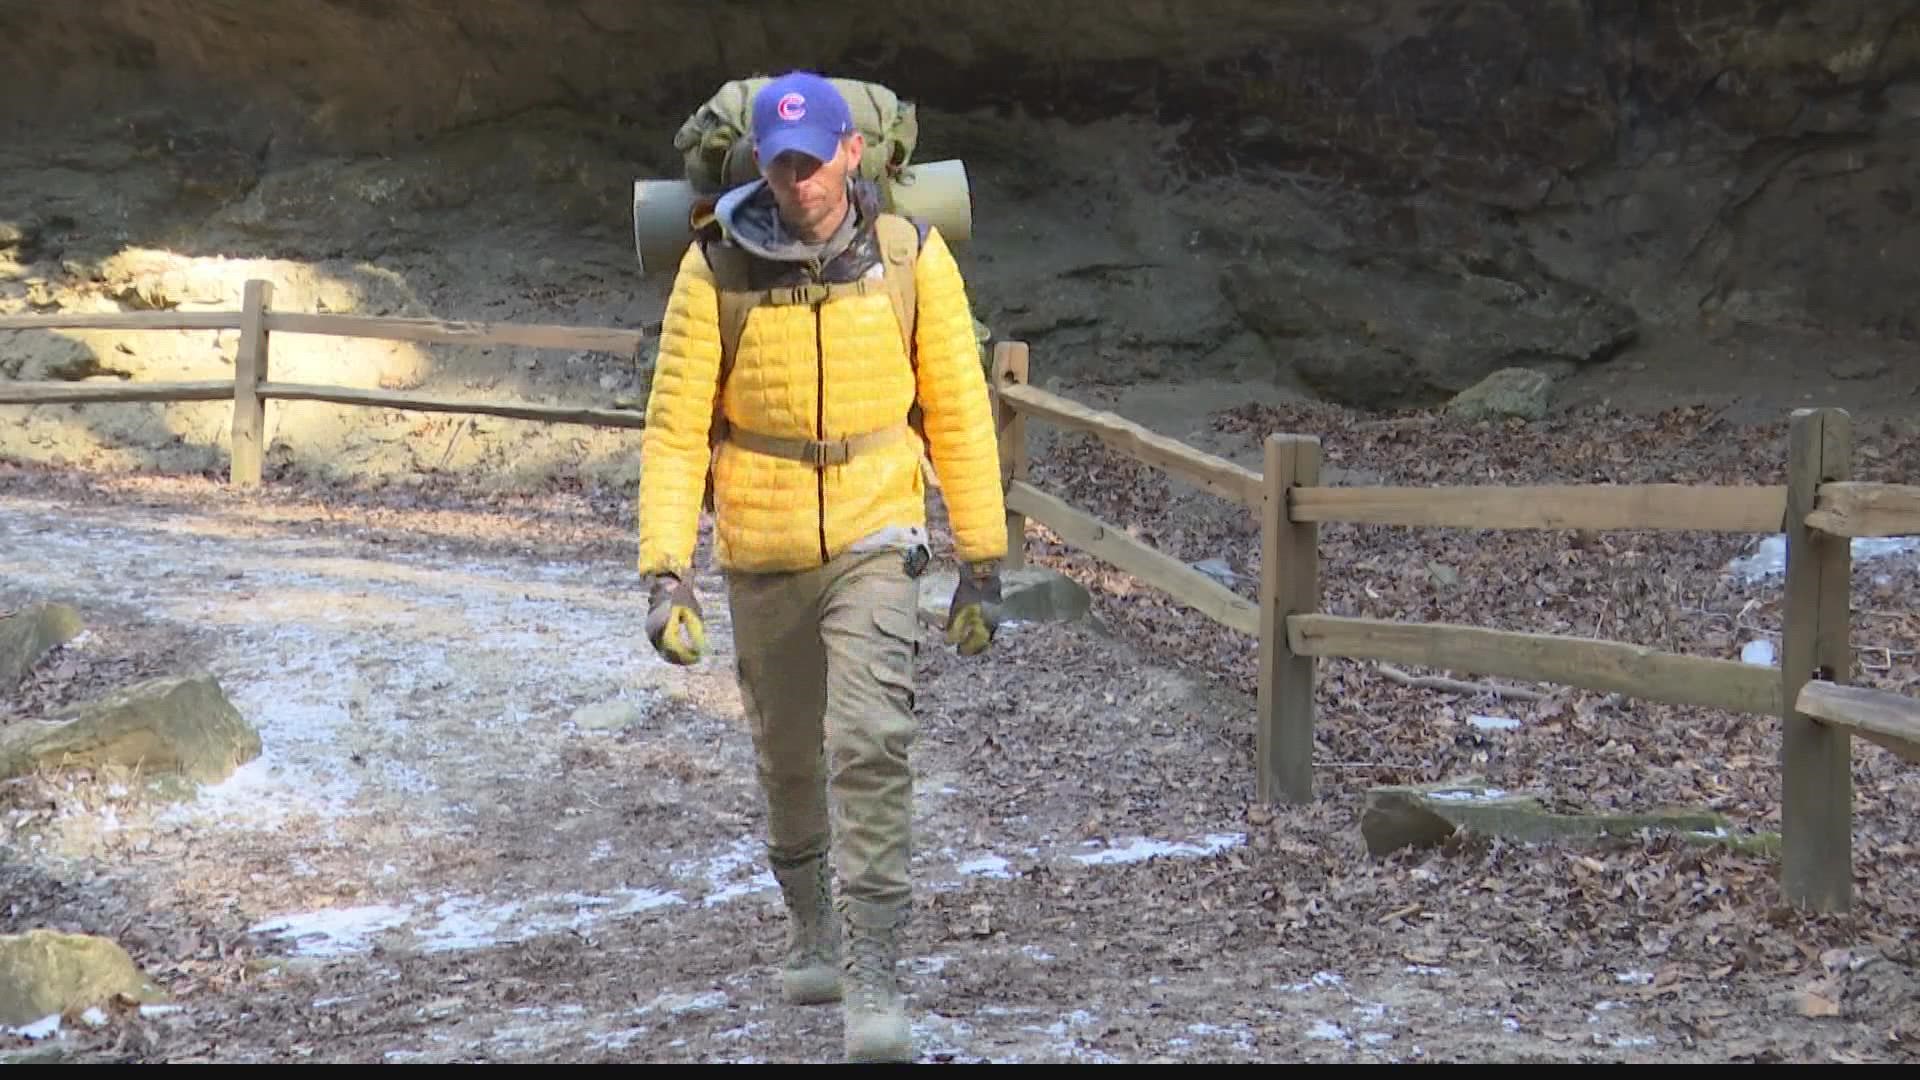 13News followed Michael Prage as he worked to inspire others with a climb right here in Indiana.